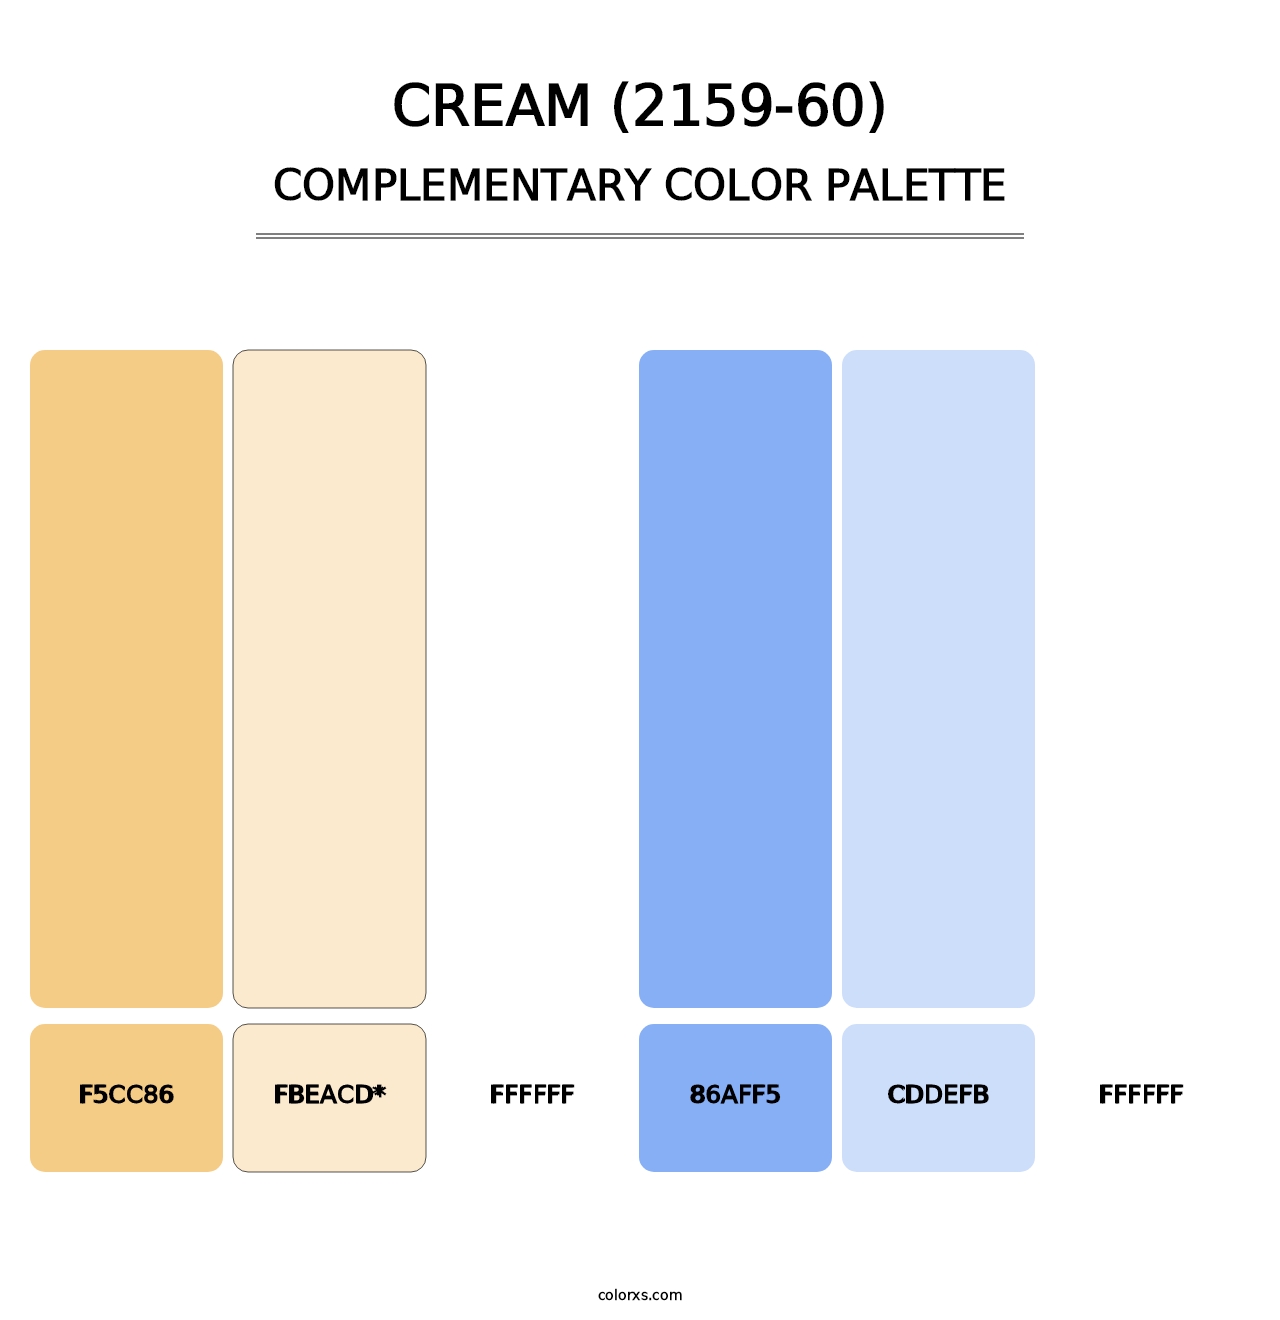 Cream (2159-60) - Complementary Color Palette